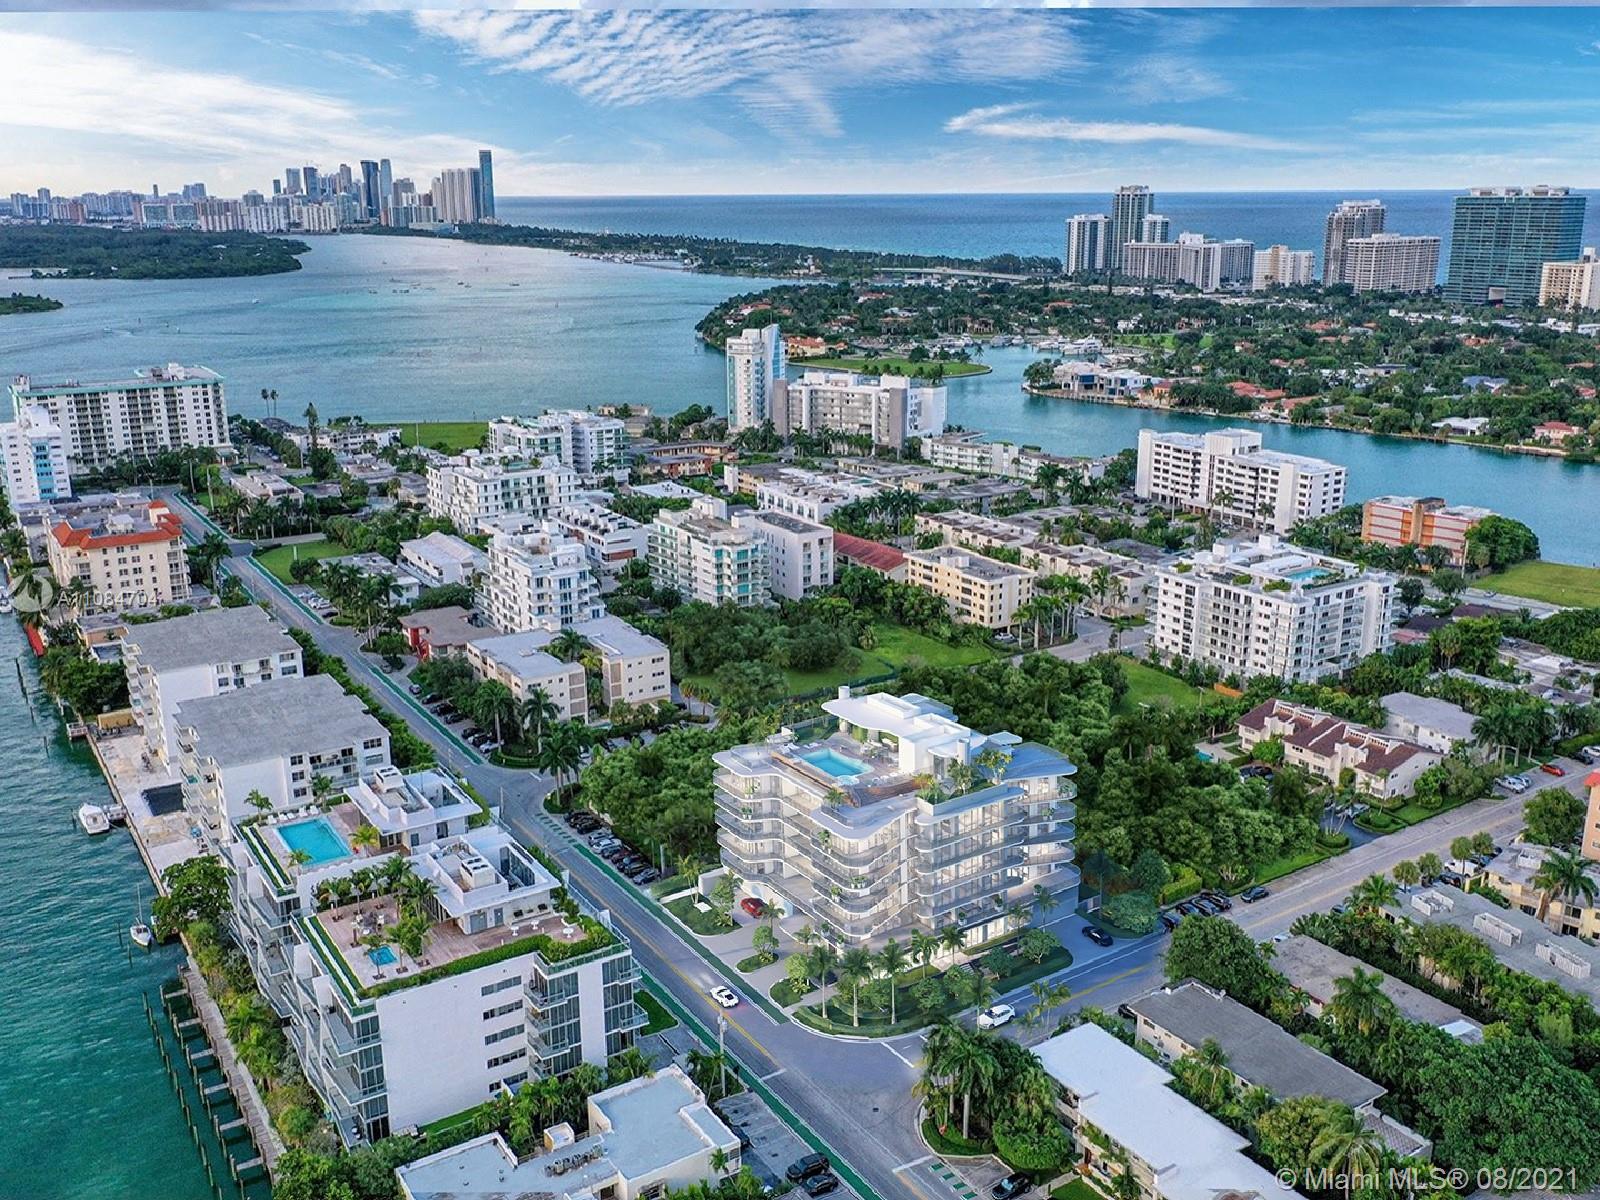 Boutique Bay Harbor Islands. 30 exclusive residences, modern design & lush gardens steps away beaches, local cafes & Bal Harbour Shops. Residences offer 2
& 3 bedroom units starting $899K ranging from 1229 -1662 SF+ large terraces with open-air spaces. 2 covered parking spaces+storage unit. Lobby level double
height ceilings, social room & fitness center. Resort style rooftop pool+sundeck+whirlpool+ 2 summer kitchens & lounge areas+childrens play area + Zen-like
garden. Italian Kitchens+Bosch appliances. Keyless entry system. World renowned architects, Revuelta Int'l Firm. Area known worldwide for family atmosphere,
sandy beaches, yachting, boating, exclusive boutique shops & restaurants + excellent public school